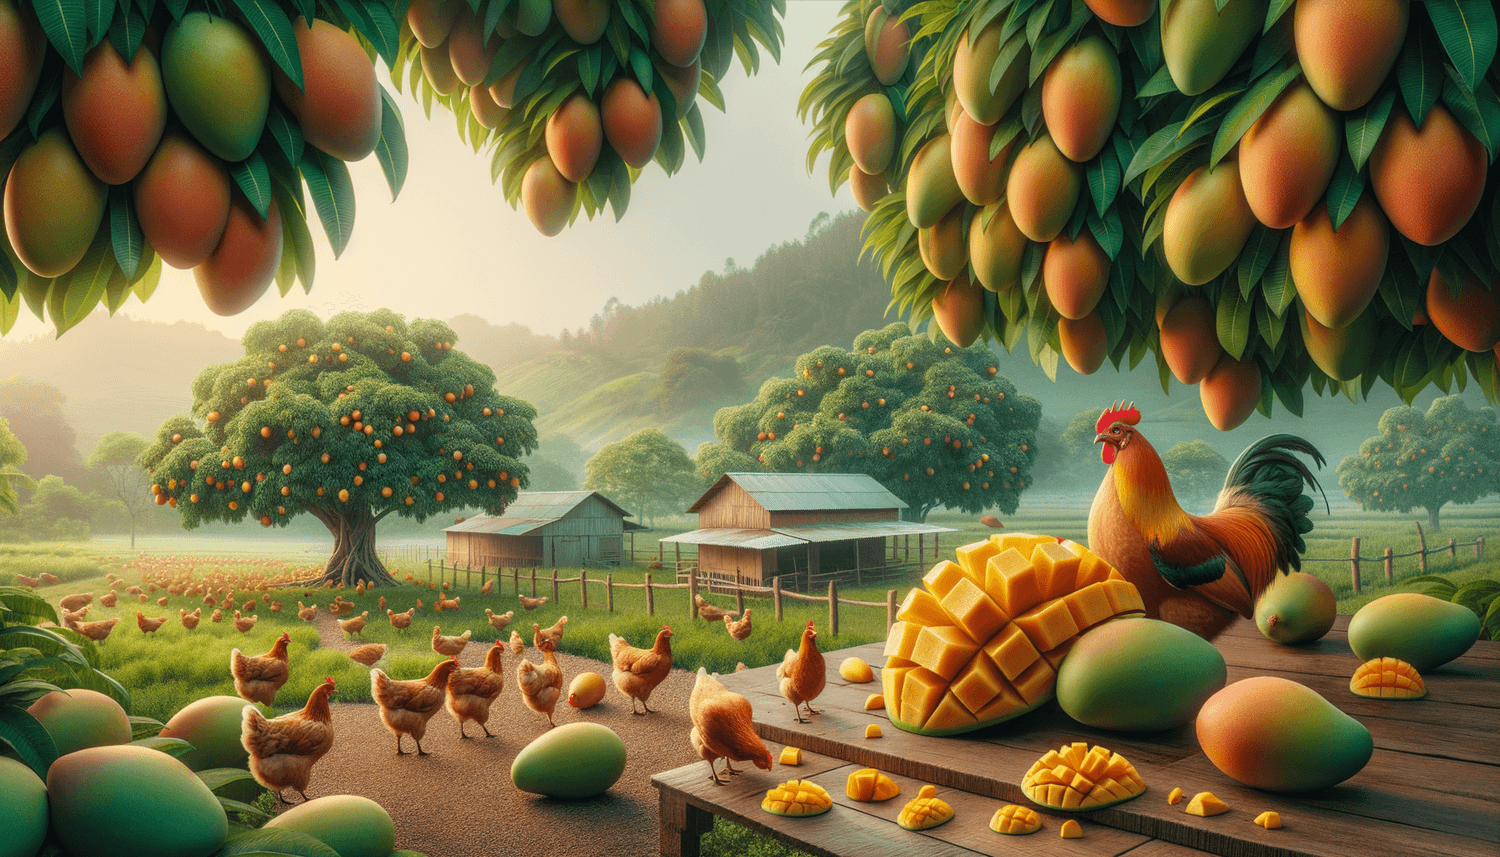 Can Chickens Eat Mangoes?